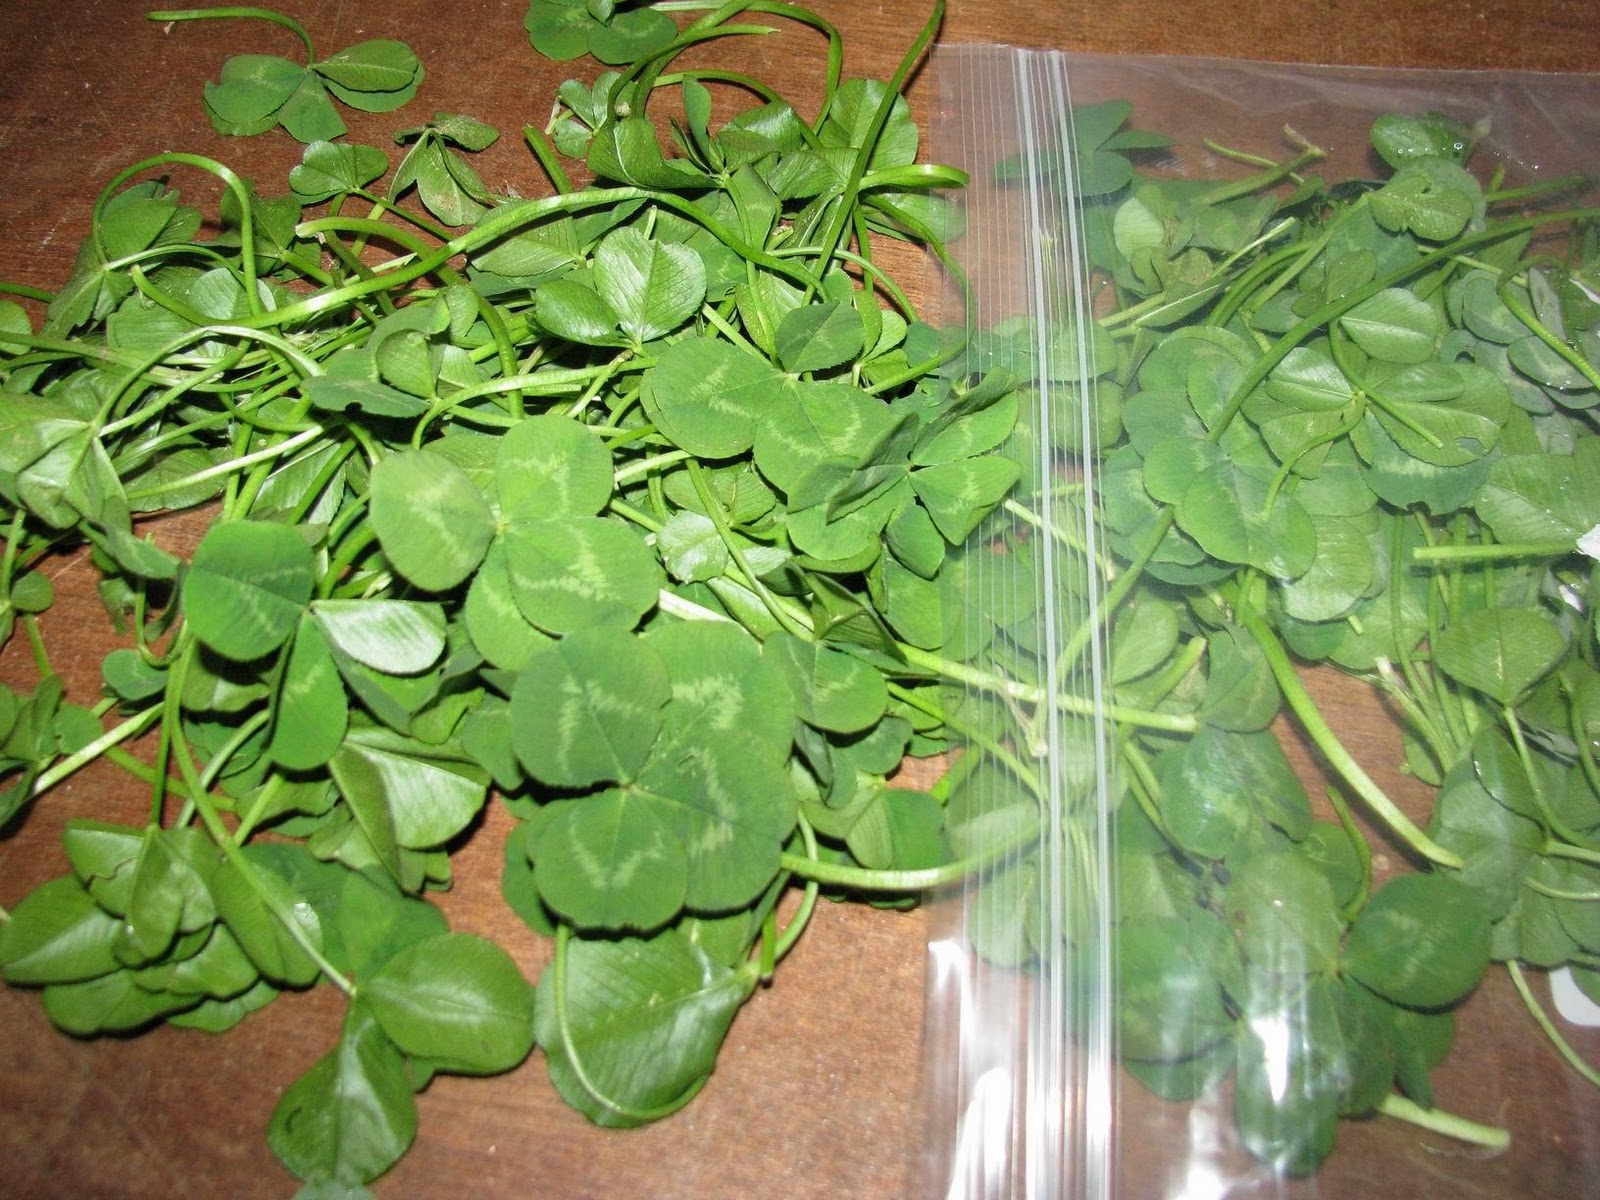 clovers, and maybe 15 or